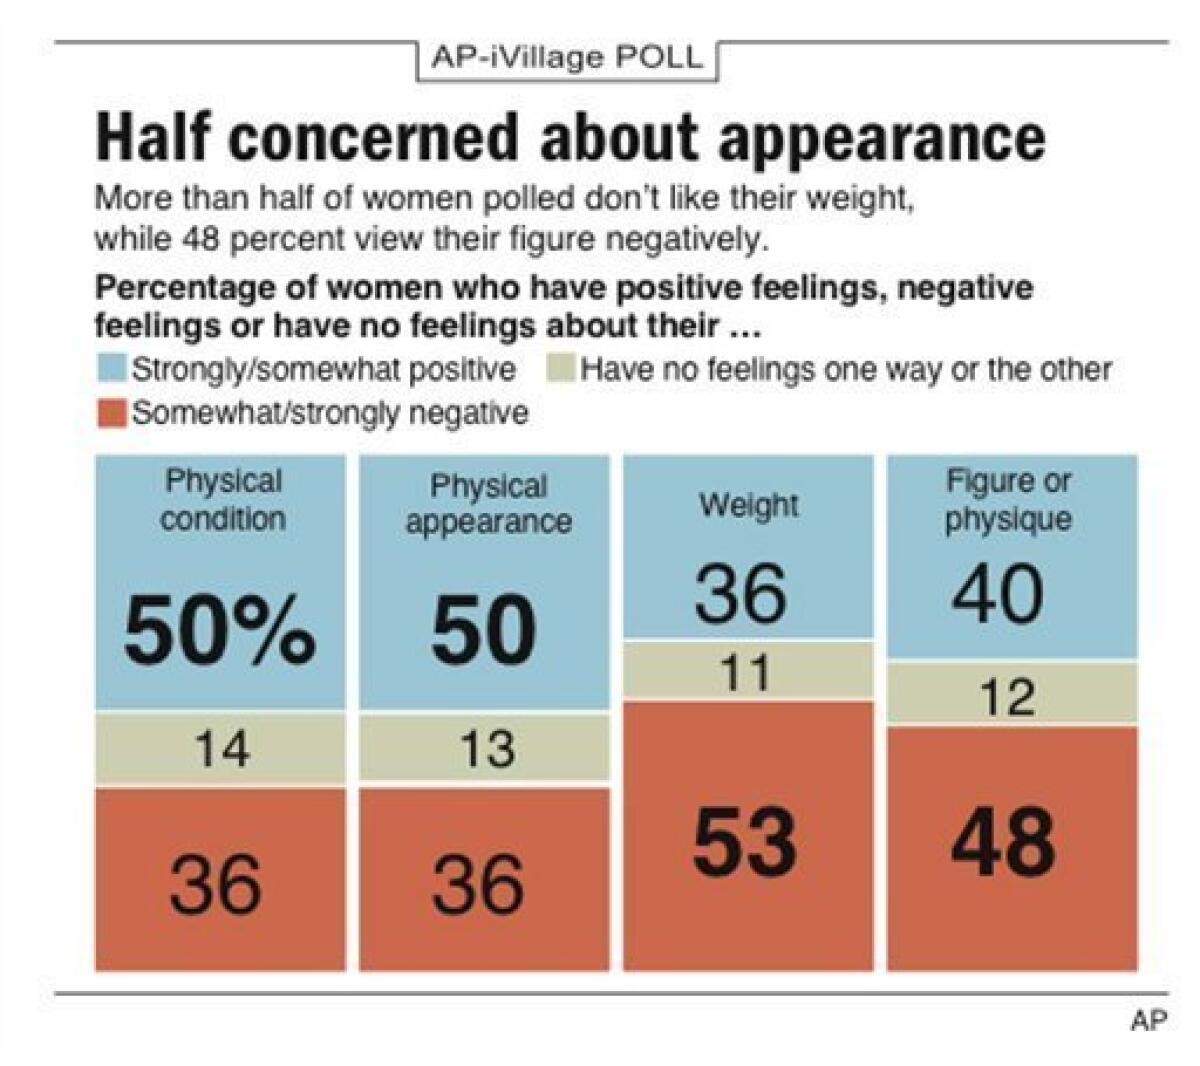 Graphic shows poll results of women's feelings about body image